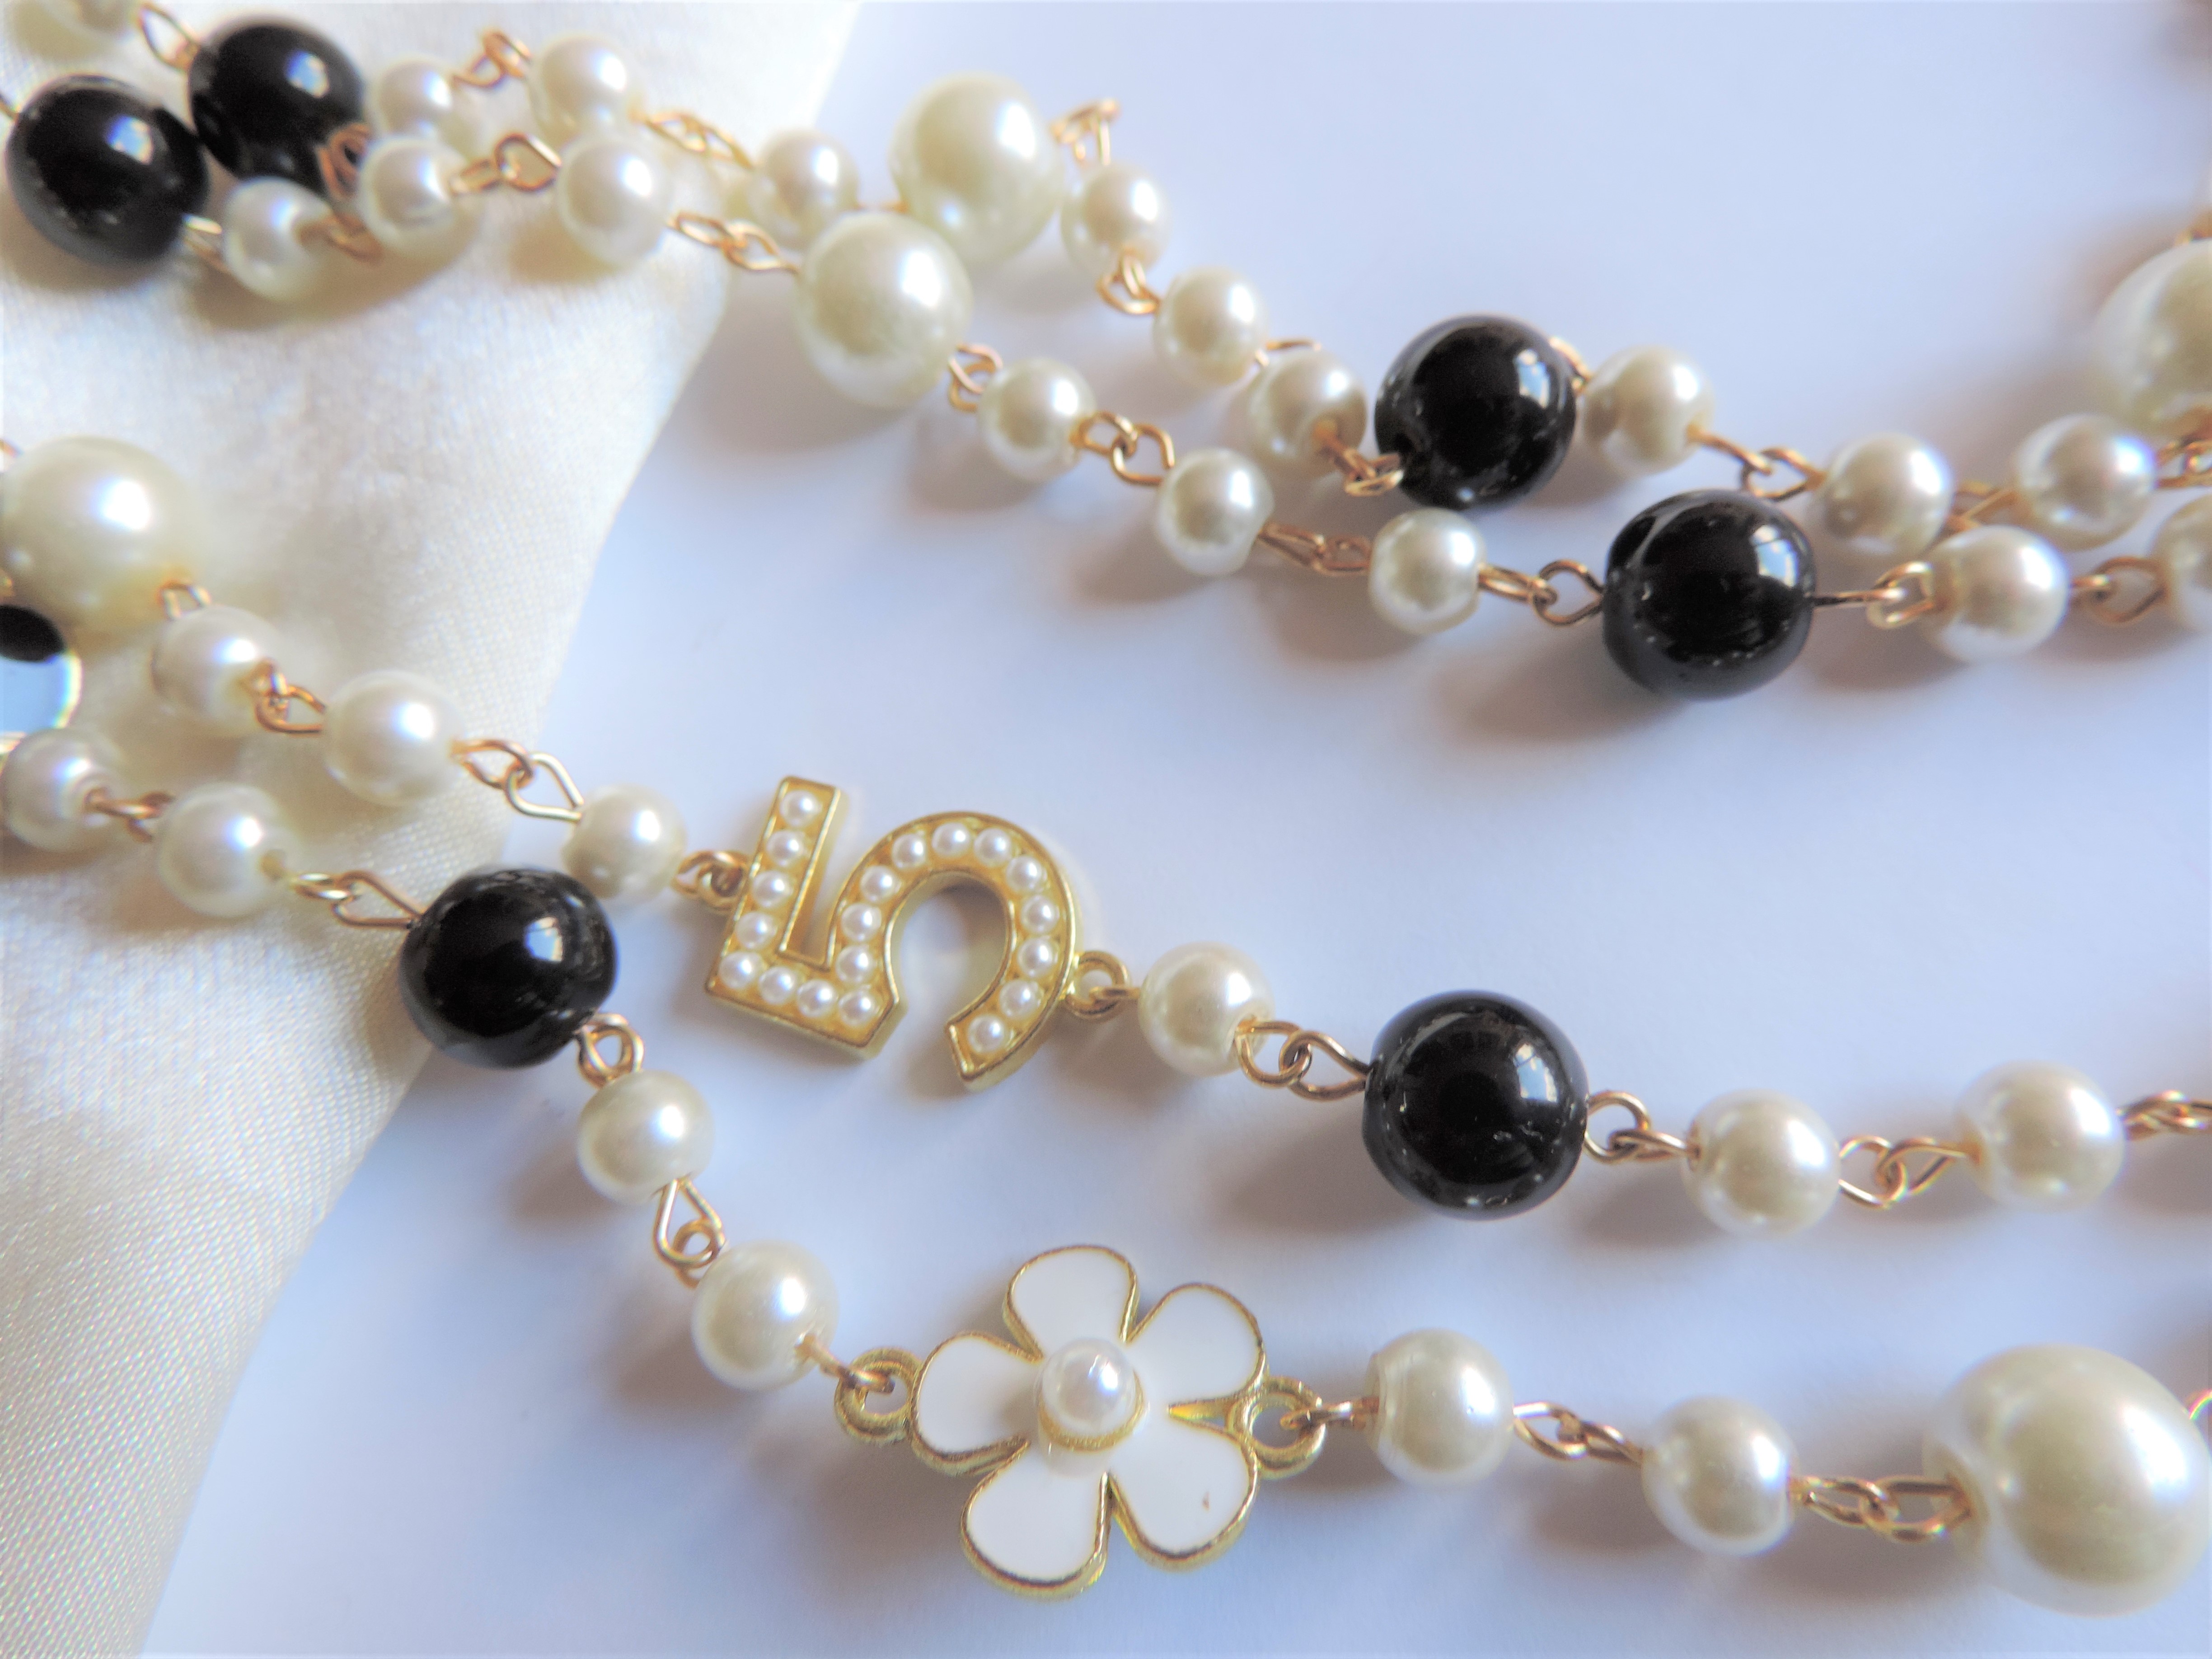 Black and White Number 5 Pearl Necklace 28 inches Long - Image 4 of 4